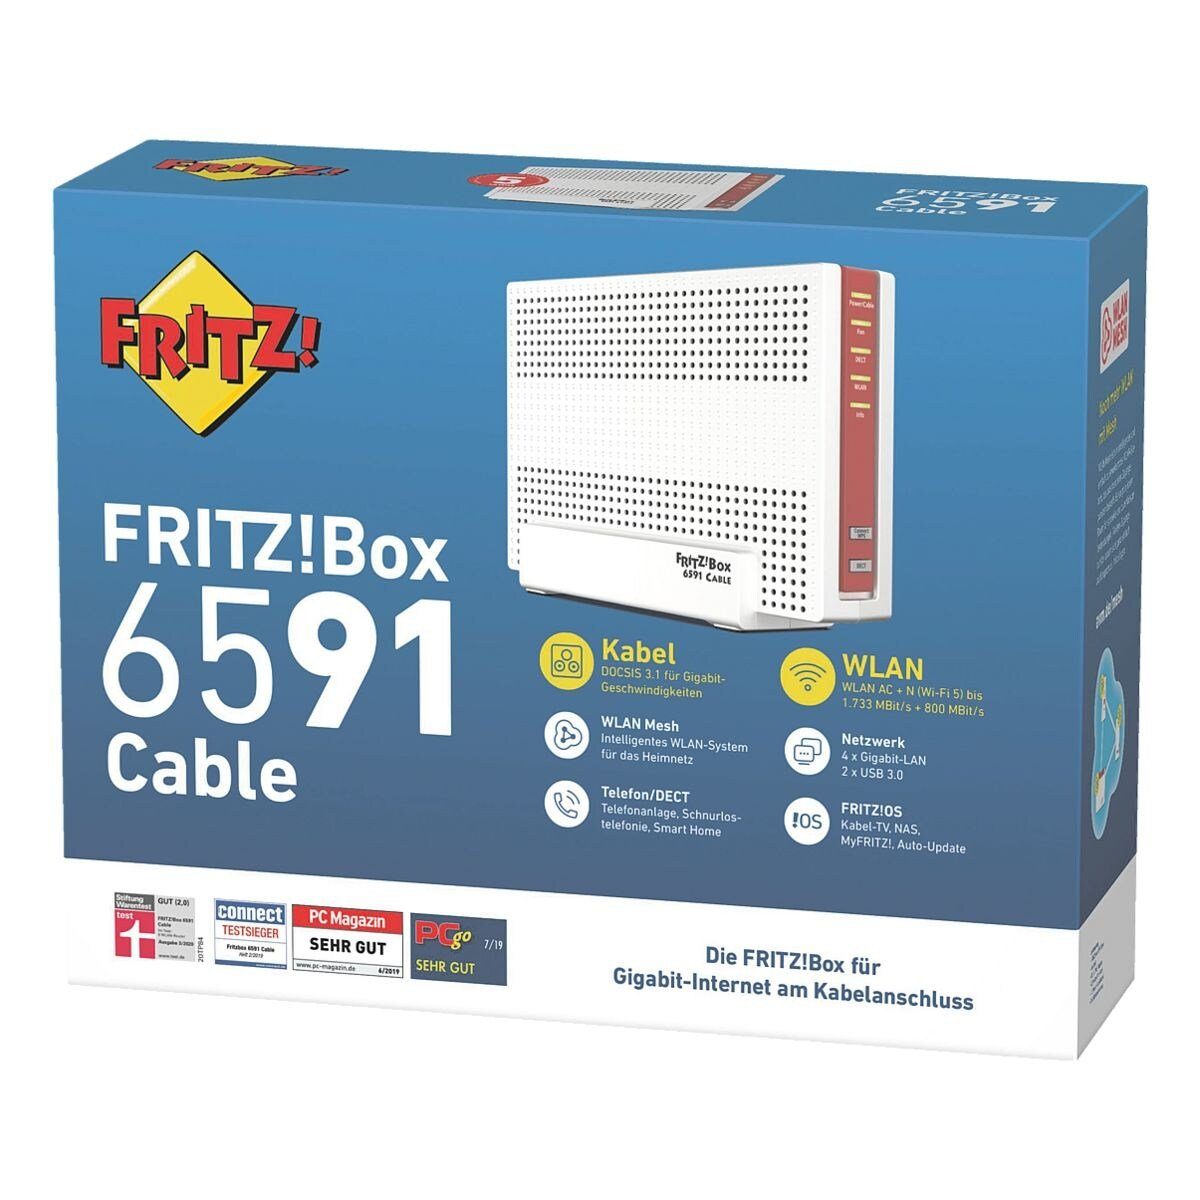 Cable Multi-User-MIMO FRITZ!Box WLAN WLAN-Router, AC AVM mit 6591 + N